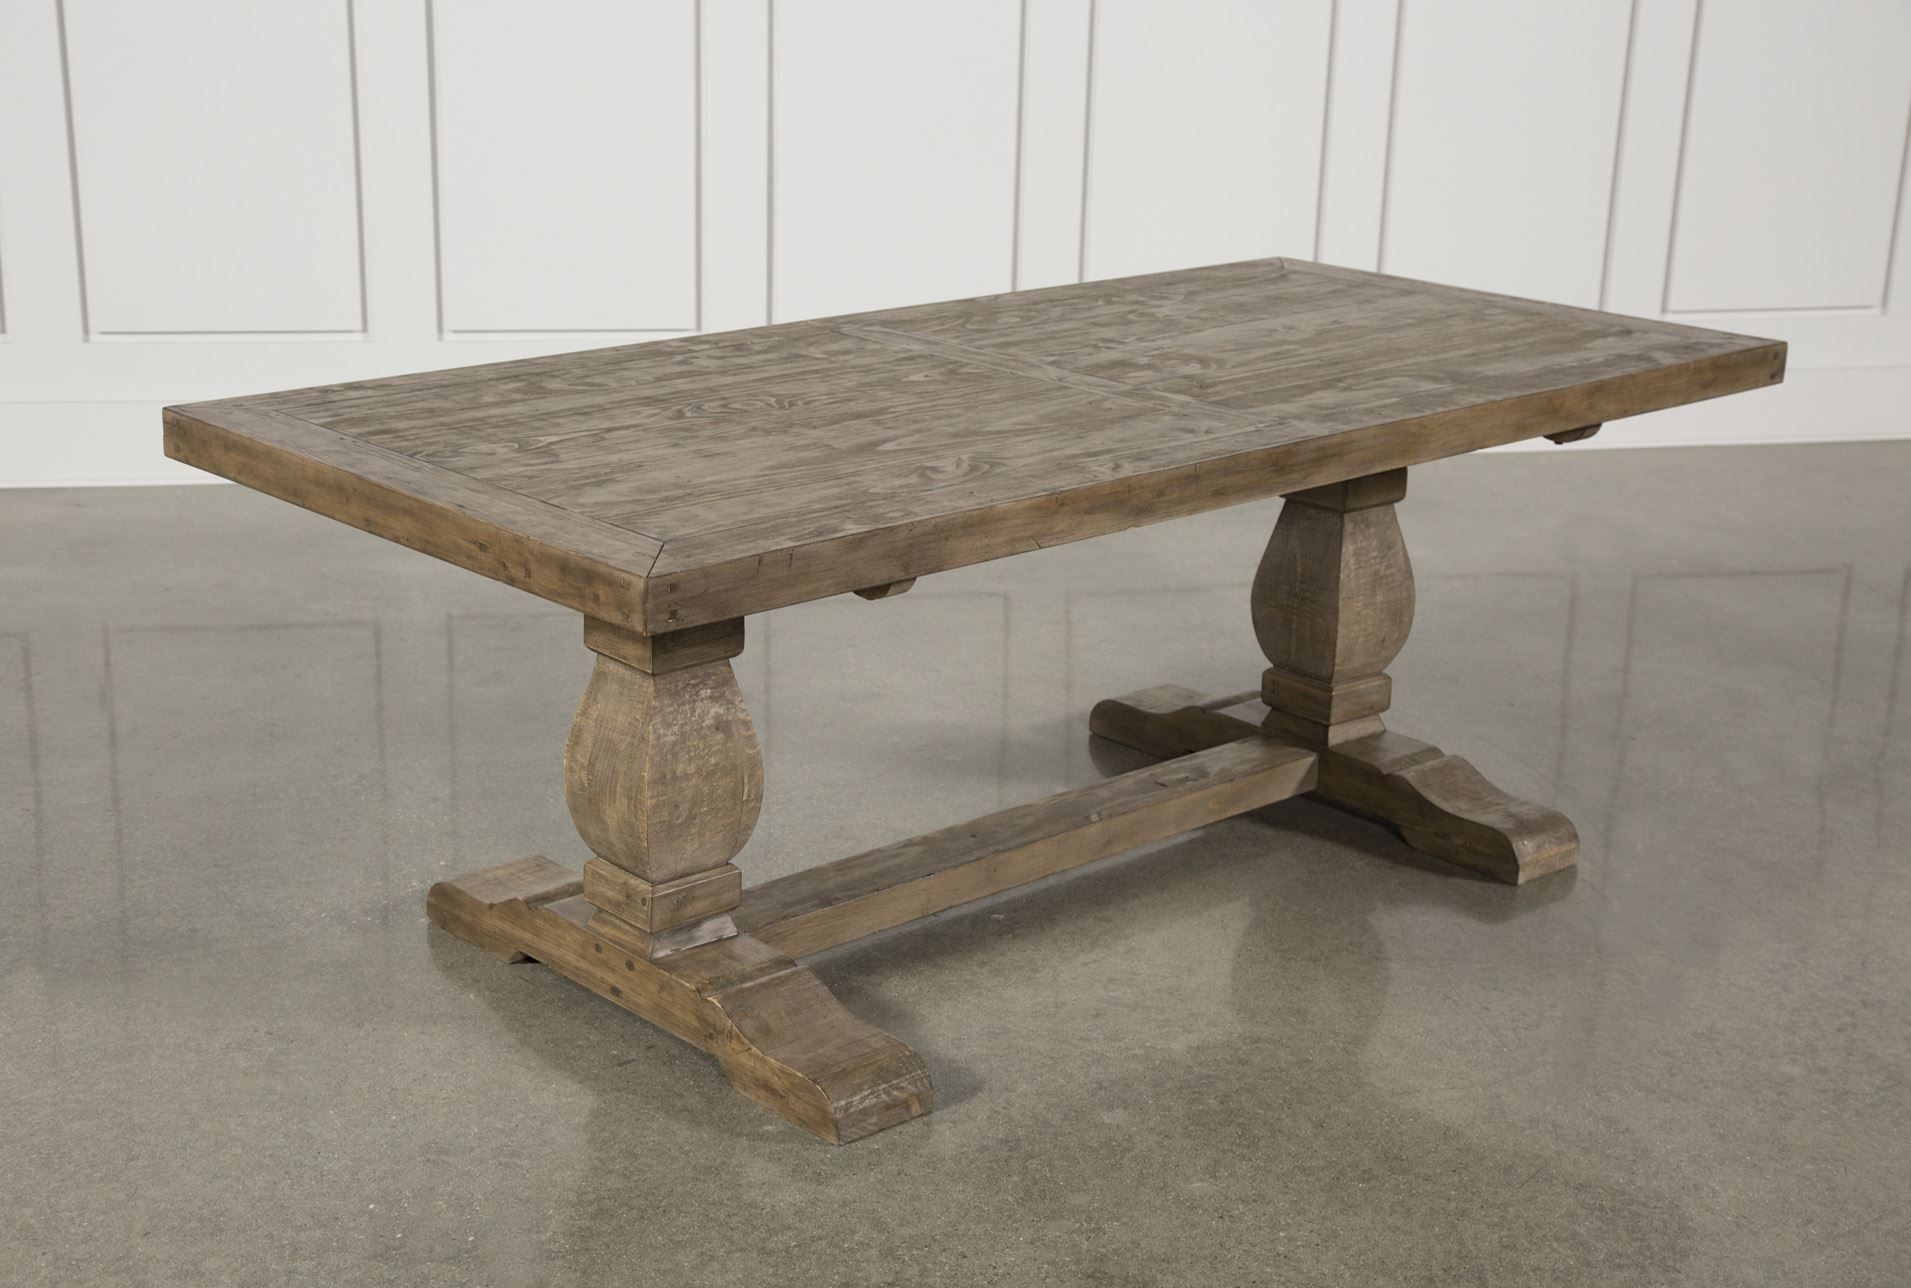 Caden Rectangle Dining Table In 2018 | Furniture | Pinterest For Recent Caden Round Dining Tables (View 5 of 20)